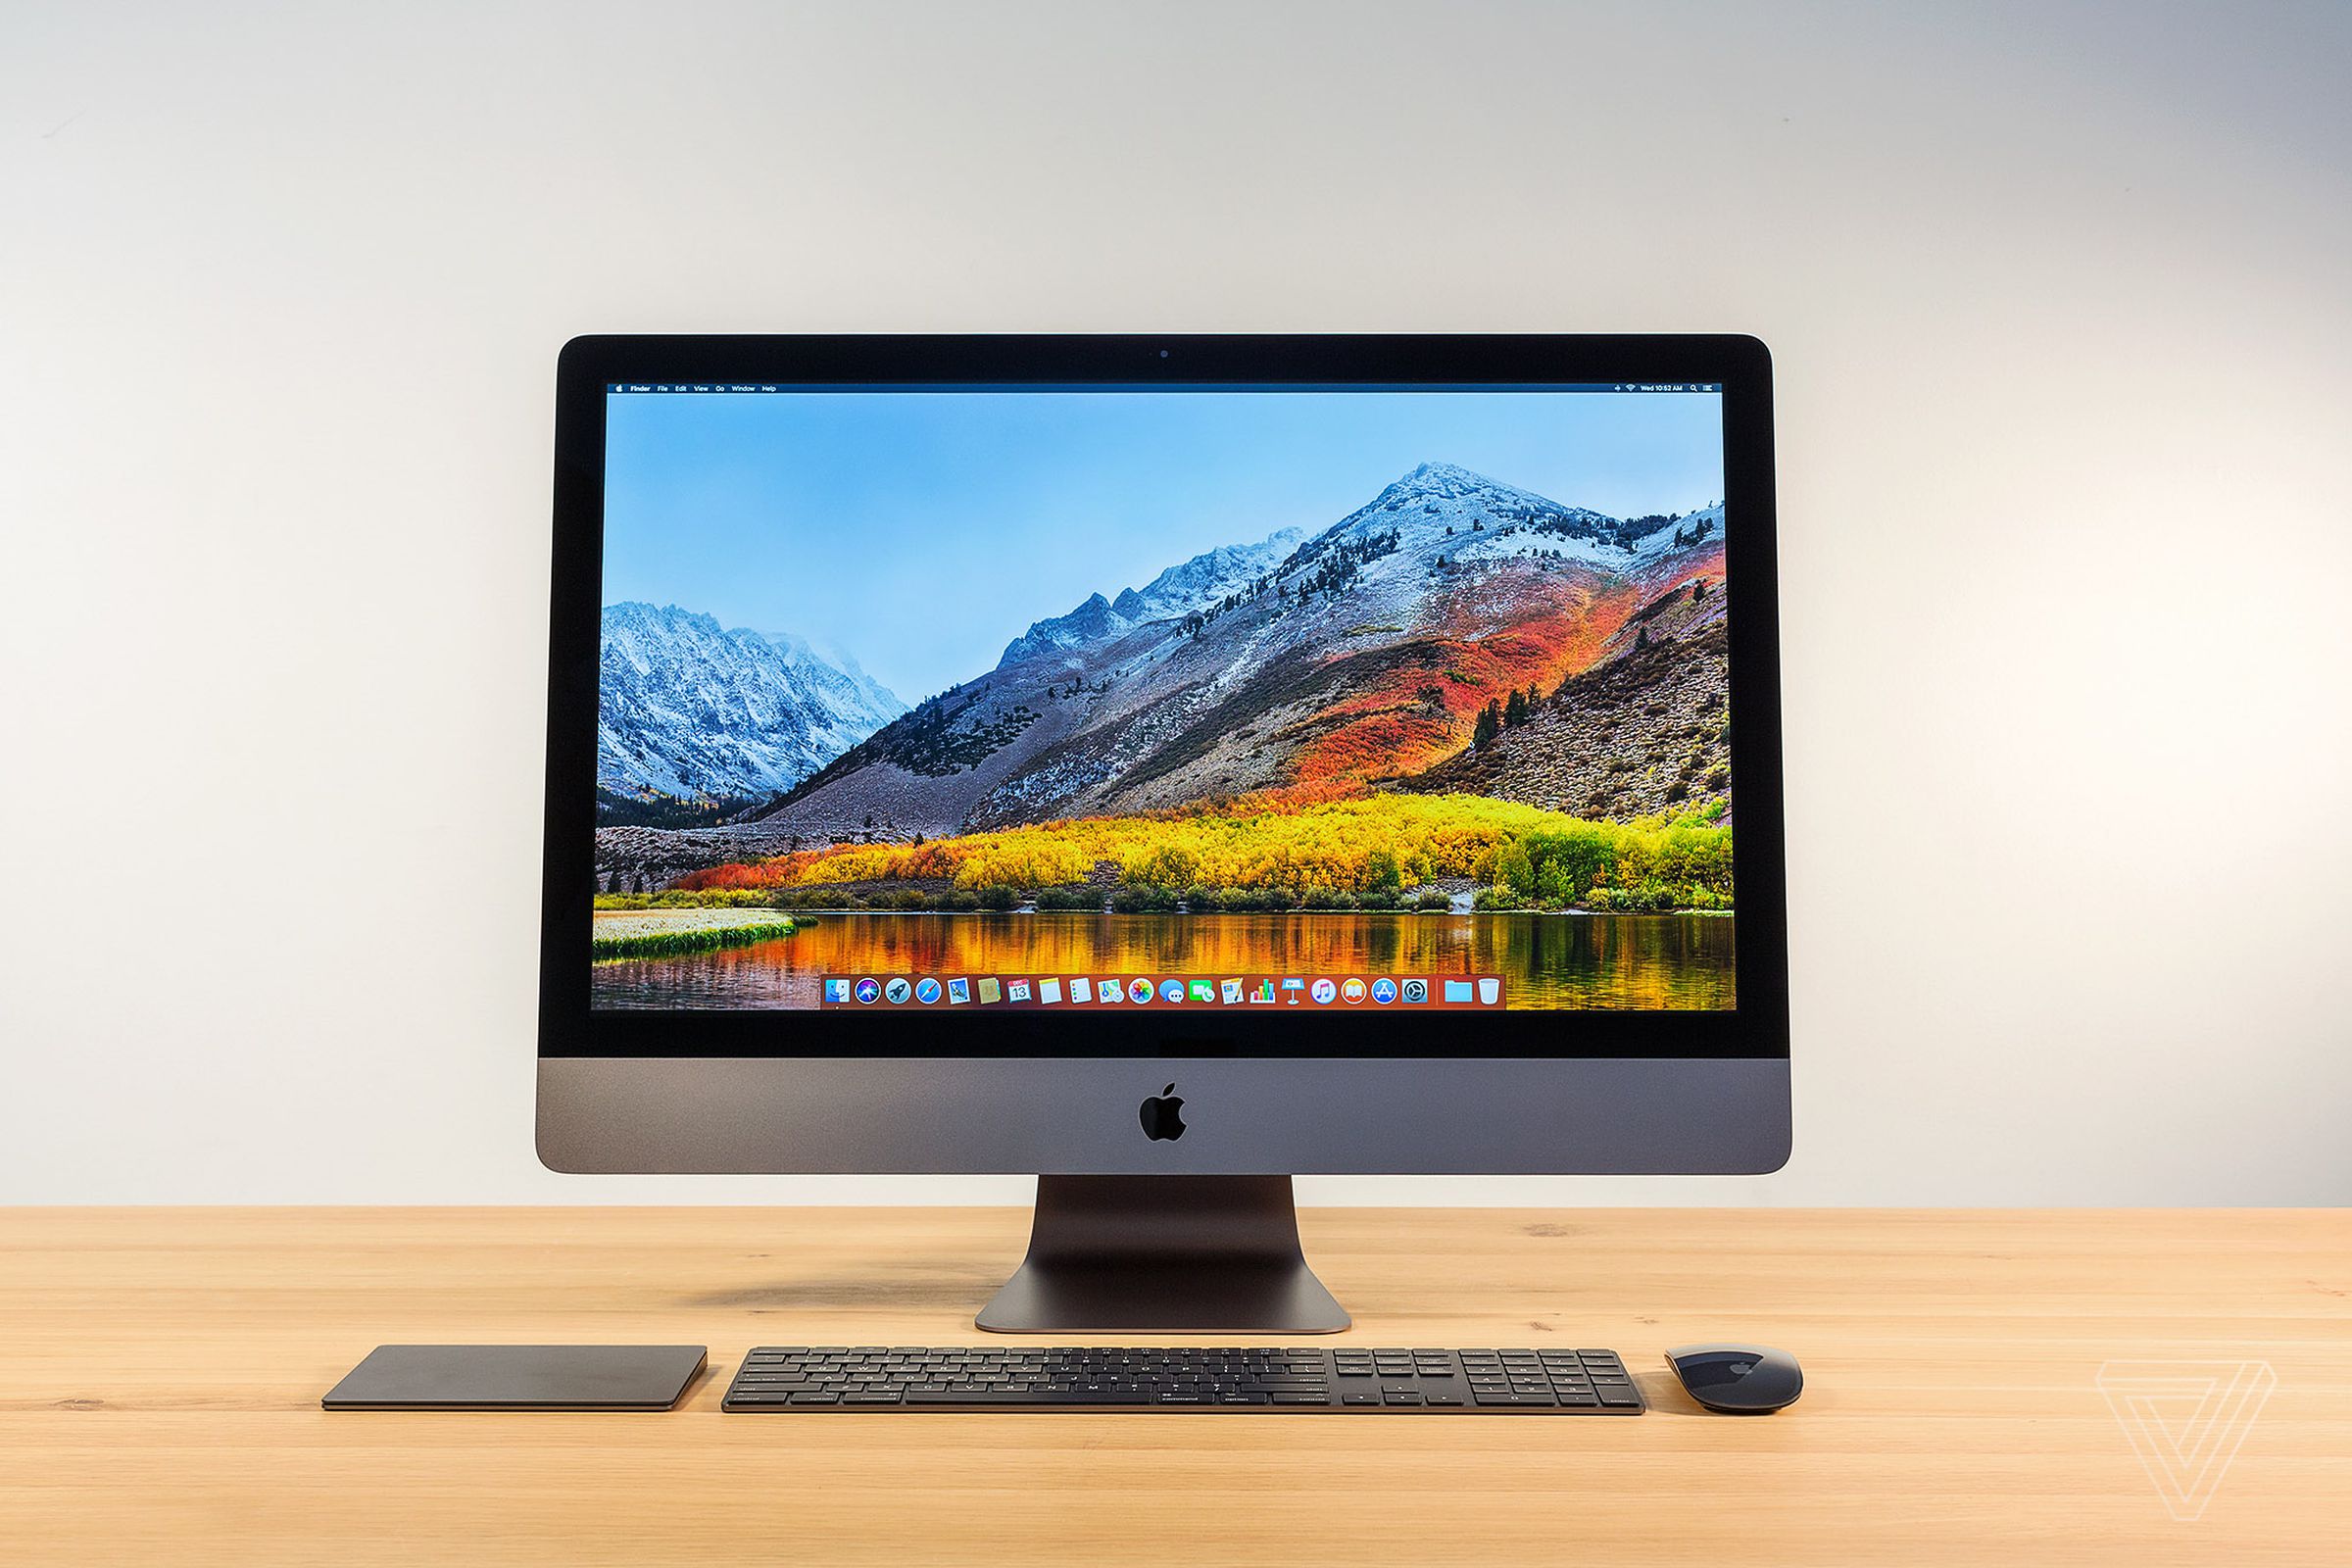 An iMac Pro on a wooden desk with matching keyboard, mouse, and trackpad.